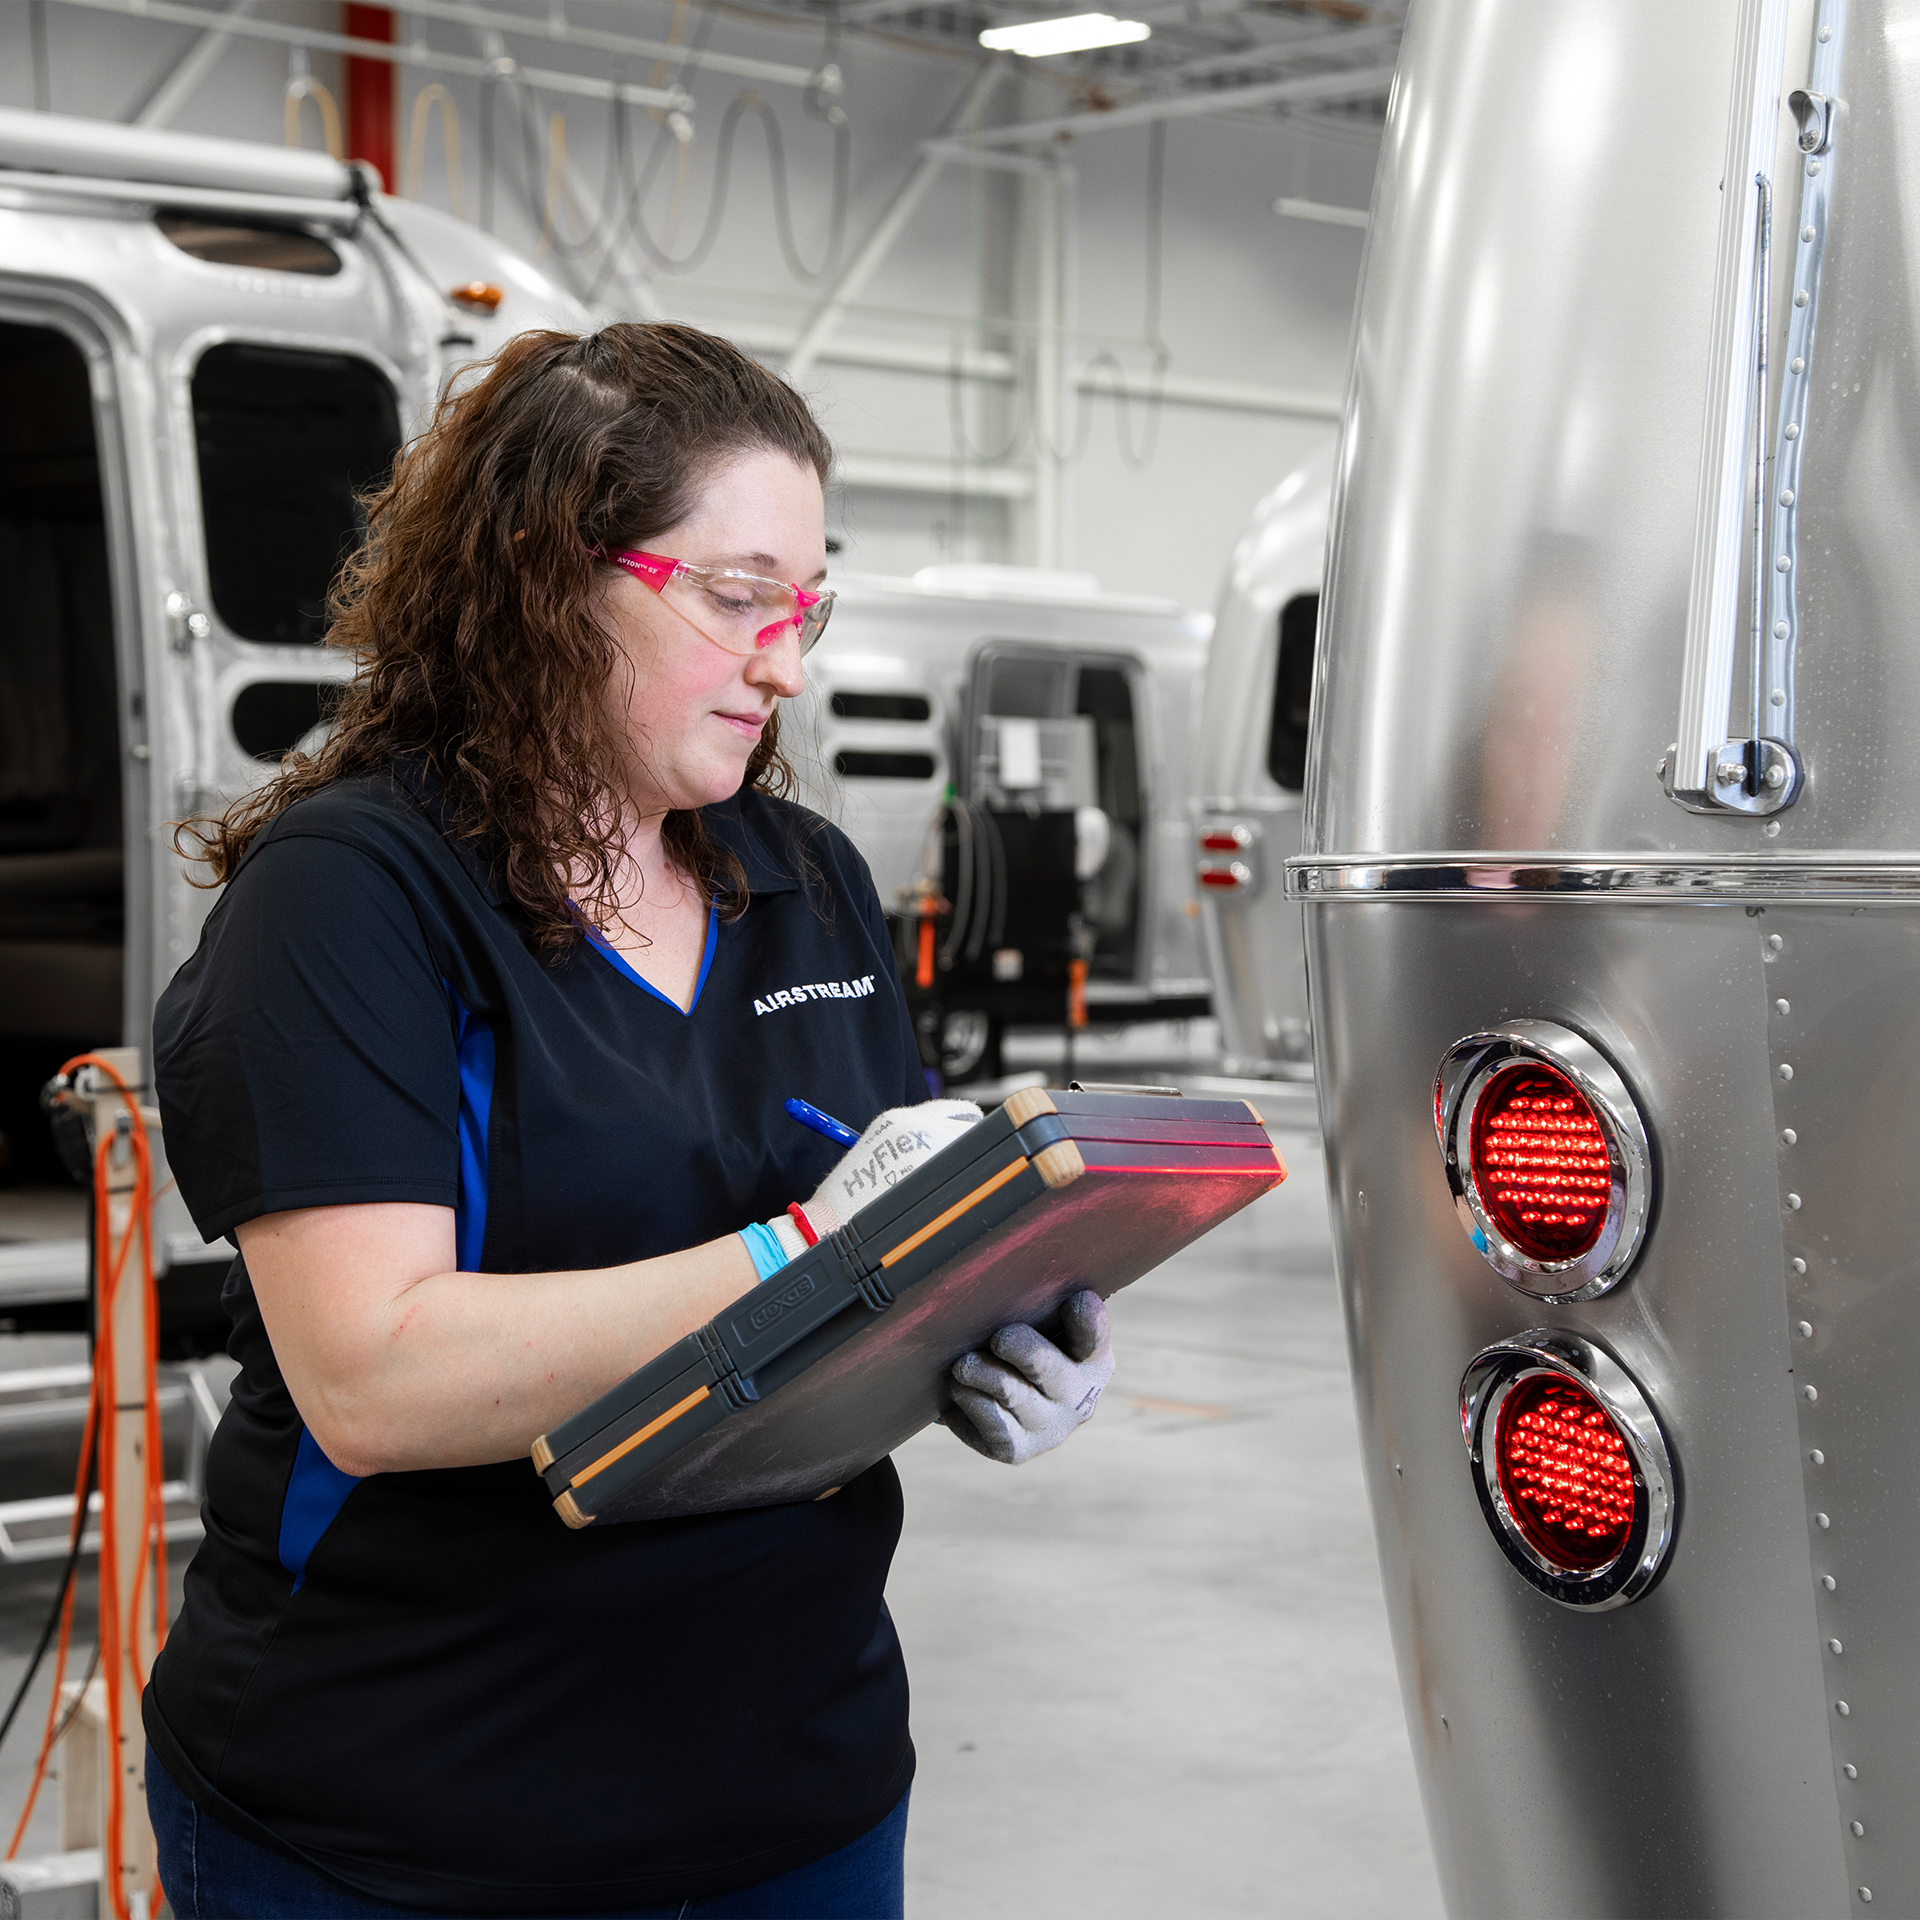 An Airstream employee checking the quality of an Airstream travel trailer.